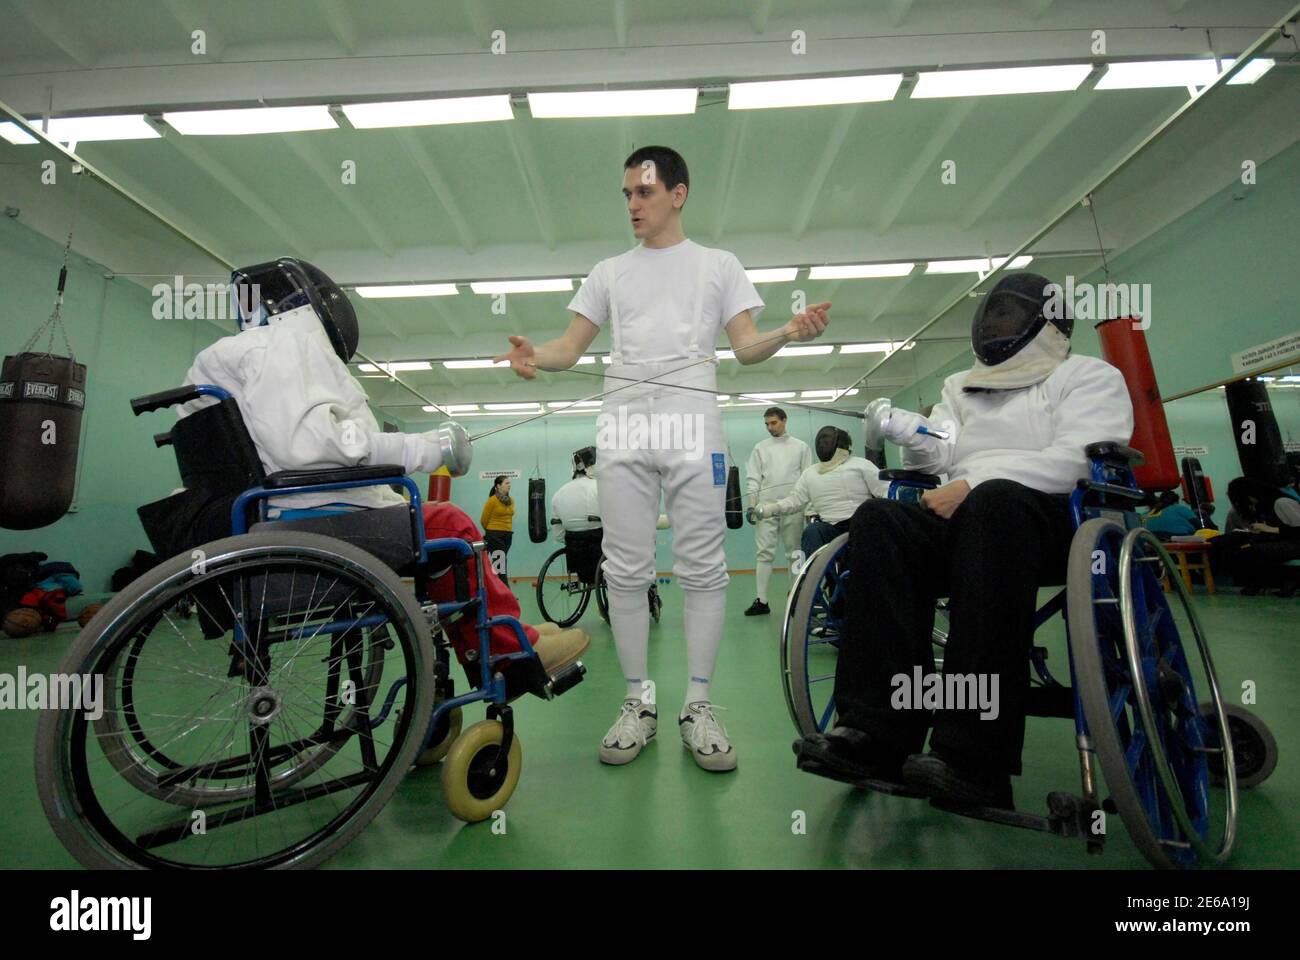 A trainer instructs disabled people during a wheelchair fencing training session in Russia's far eastern city of Vladivostok March 11, 2011. The Kovcheg (Ark) organisation, which supports handicapped people, and local authorities held a series of sporting events to popularise Paralympic sports.  REUTERS/Yuri Maltsev  (RUSSIA - Tags: SPORT HEALTH FENCING OLYMPICS) Stock Photo